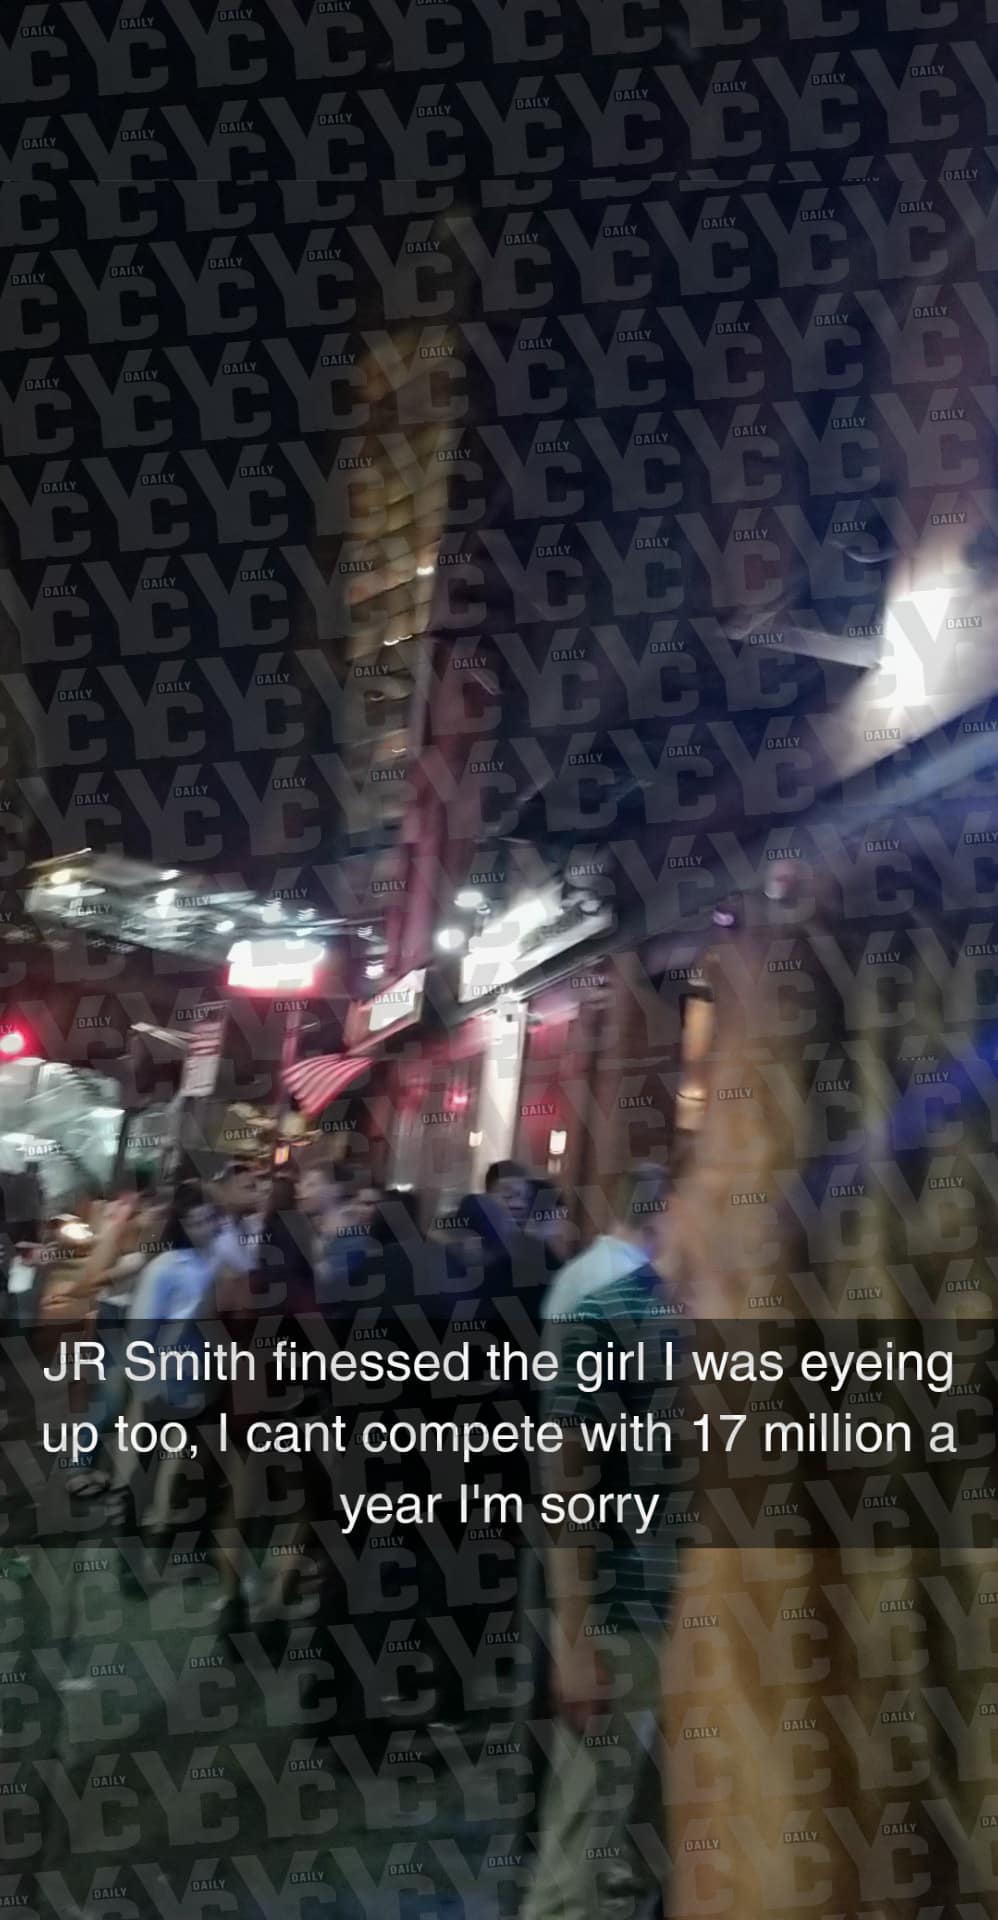 Massimo Cusumano snapped a pic, excited to see Cleveland Cavalier JR Smith! The NBA star is accused of snatching college student's phone and throwing it into a construction site ... over a Snapchat. (PHOTO: YC/TMZ/SNAPCHAT)